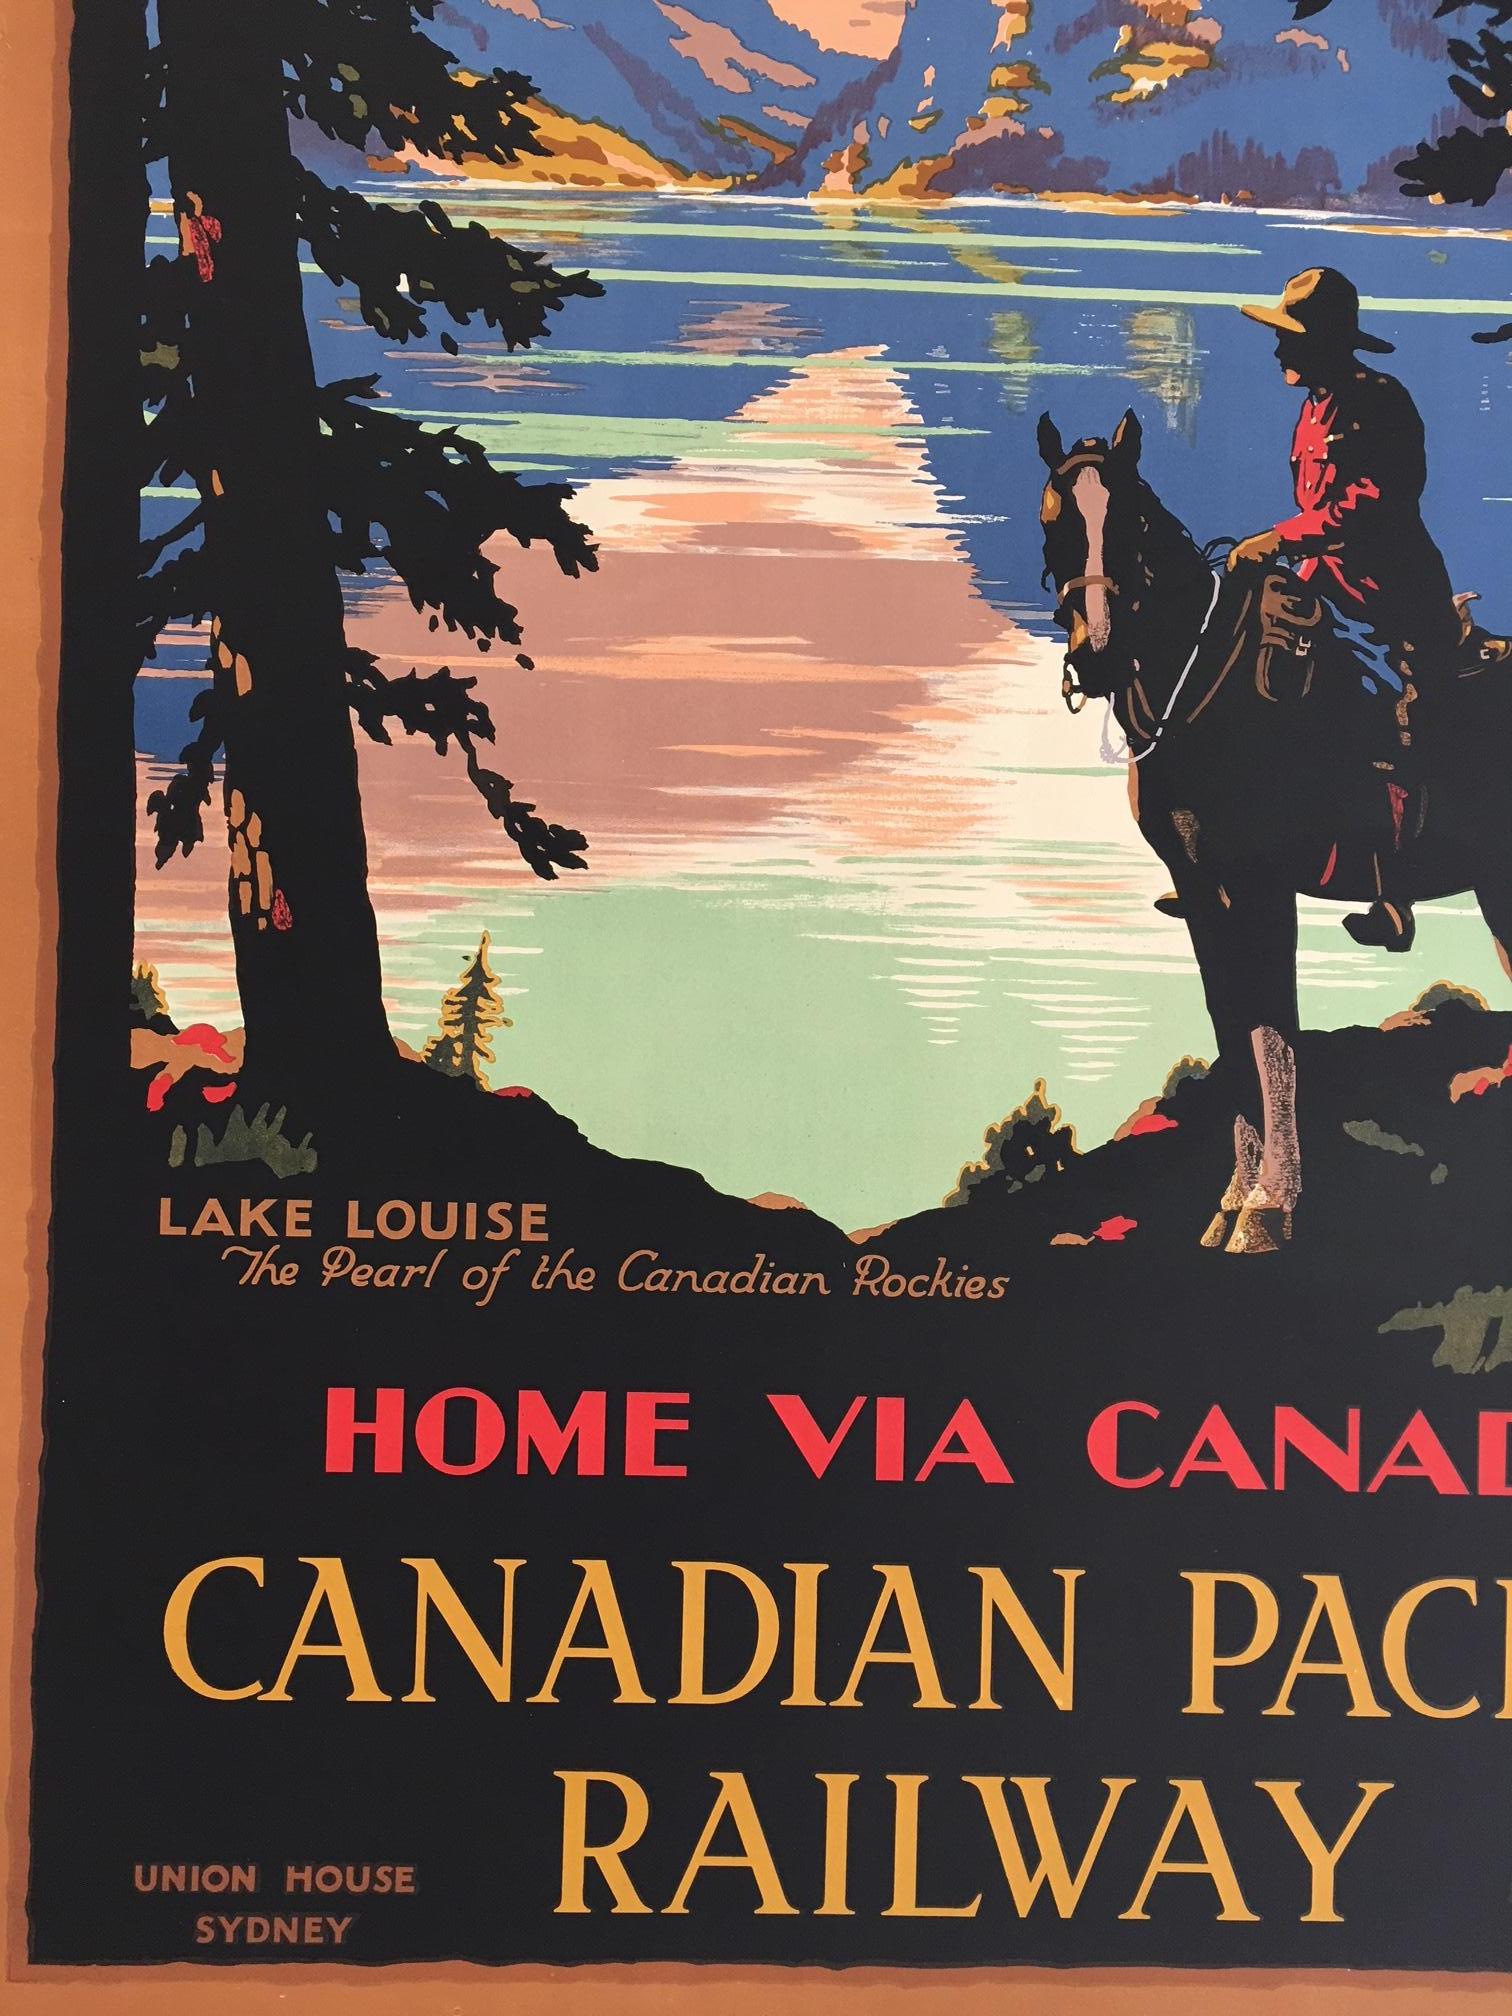 Original vintage poster of Lake Louise by Trompf, 1930s


Artist: Percy Trompf

Rare poster 110 x 75 cm

Percival Albert (Percy) Trompf (1902-1964), was a commercial artist born on 30 May 1902 at Beaufort, Victoria, Australia. His posters for